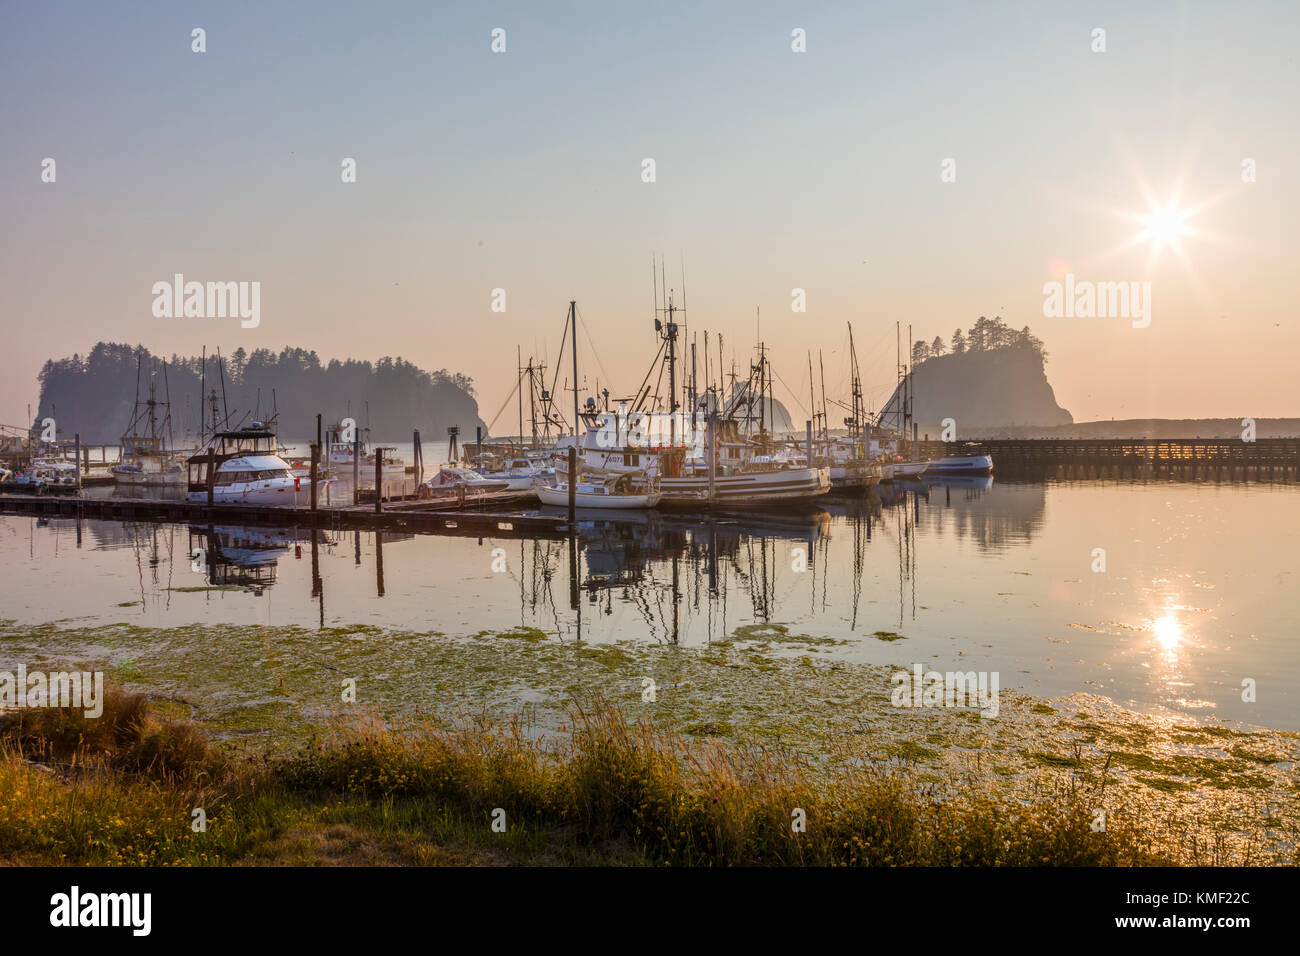 Fishing boats on foggy day in marina in town of La Push on the Quileute Indian Reservation in Washington State in the United States Stock Photo